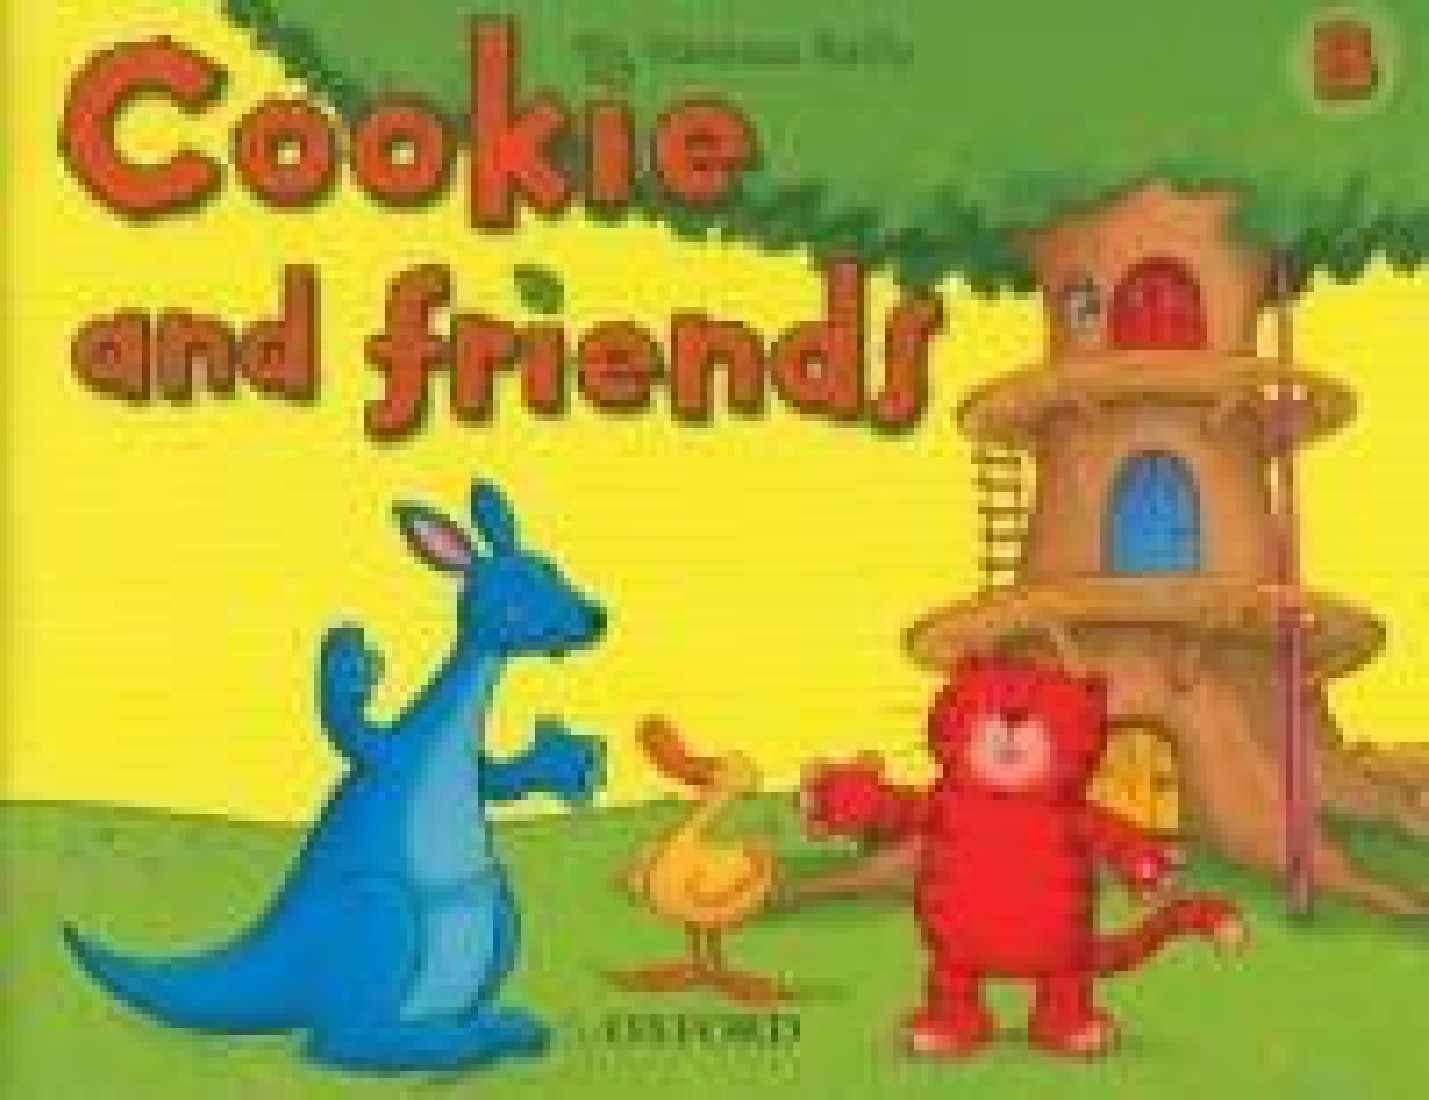 COOKIE AND FRIENDS B STUDENTS BOOK